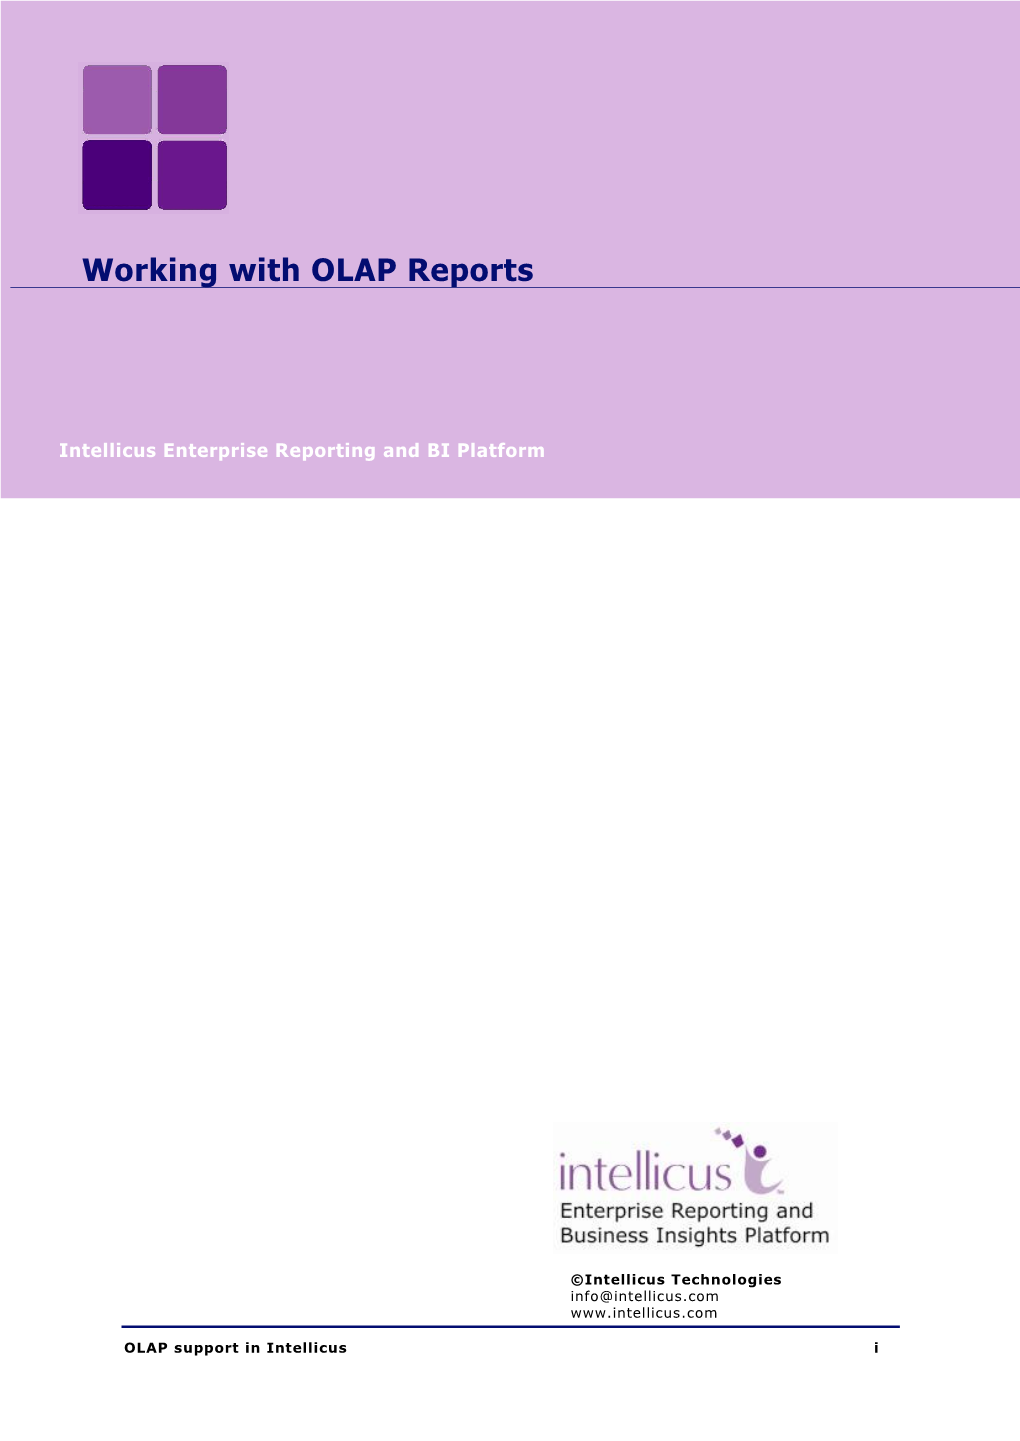 Working with OLAP Reports